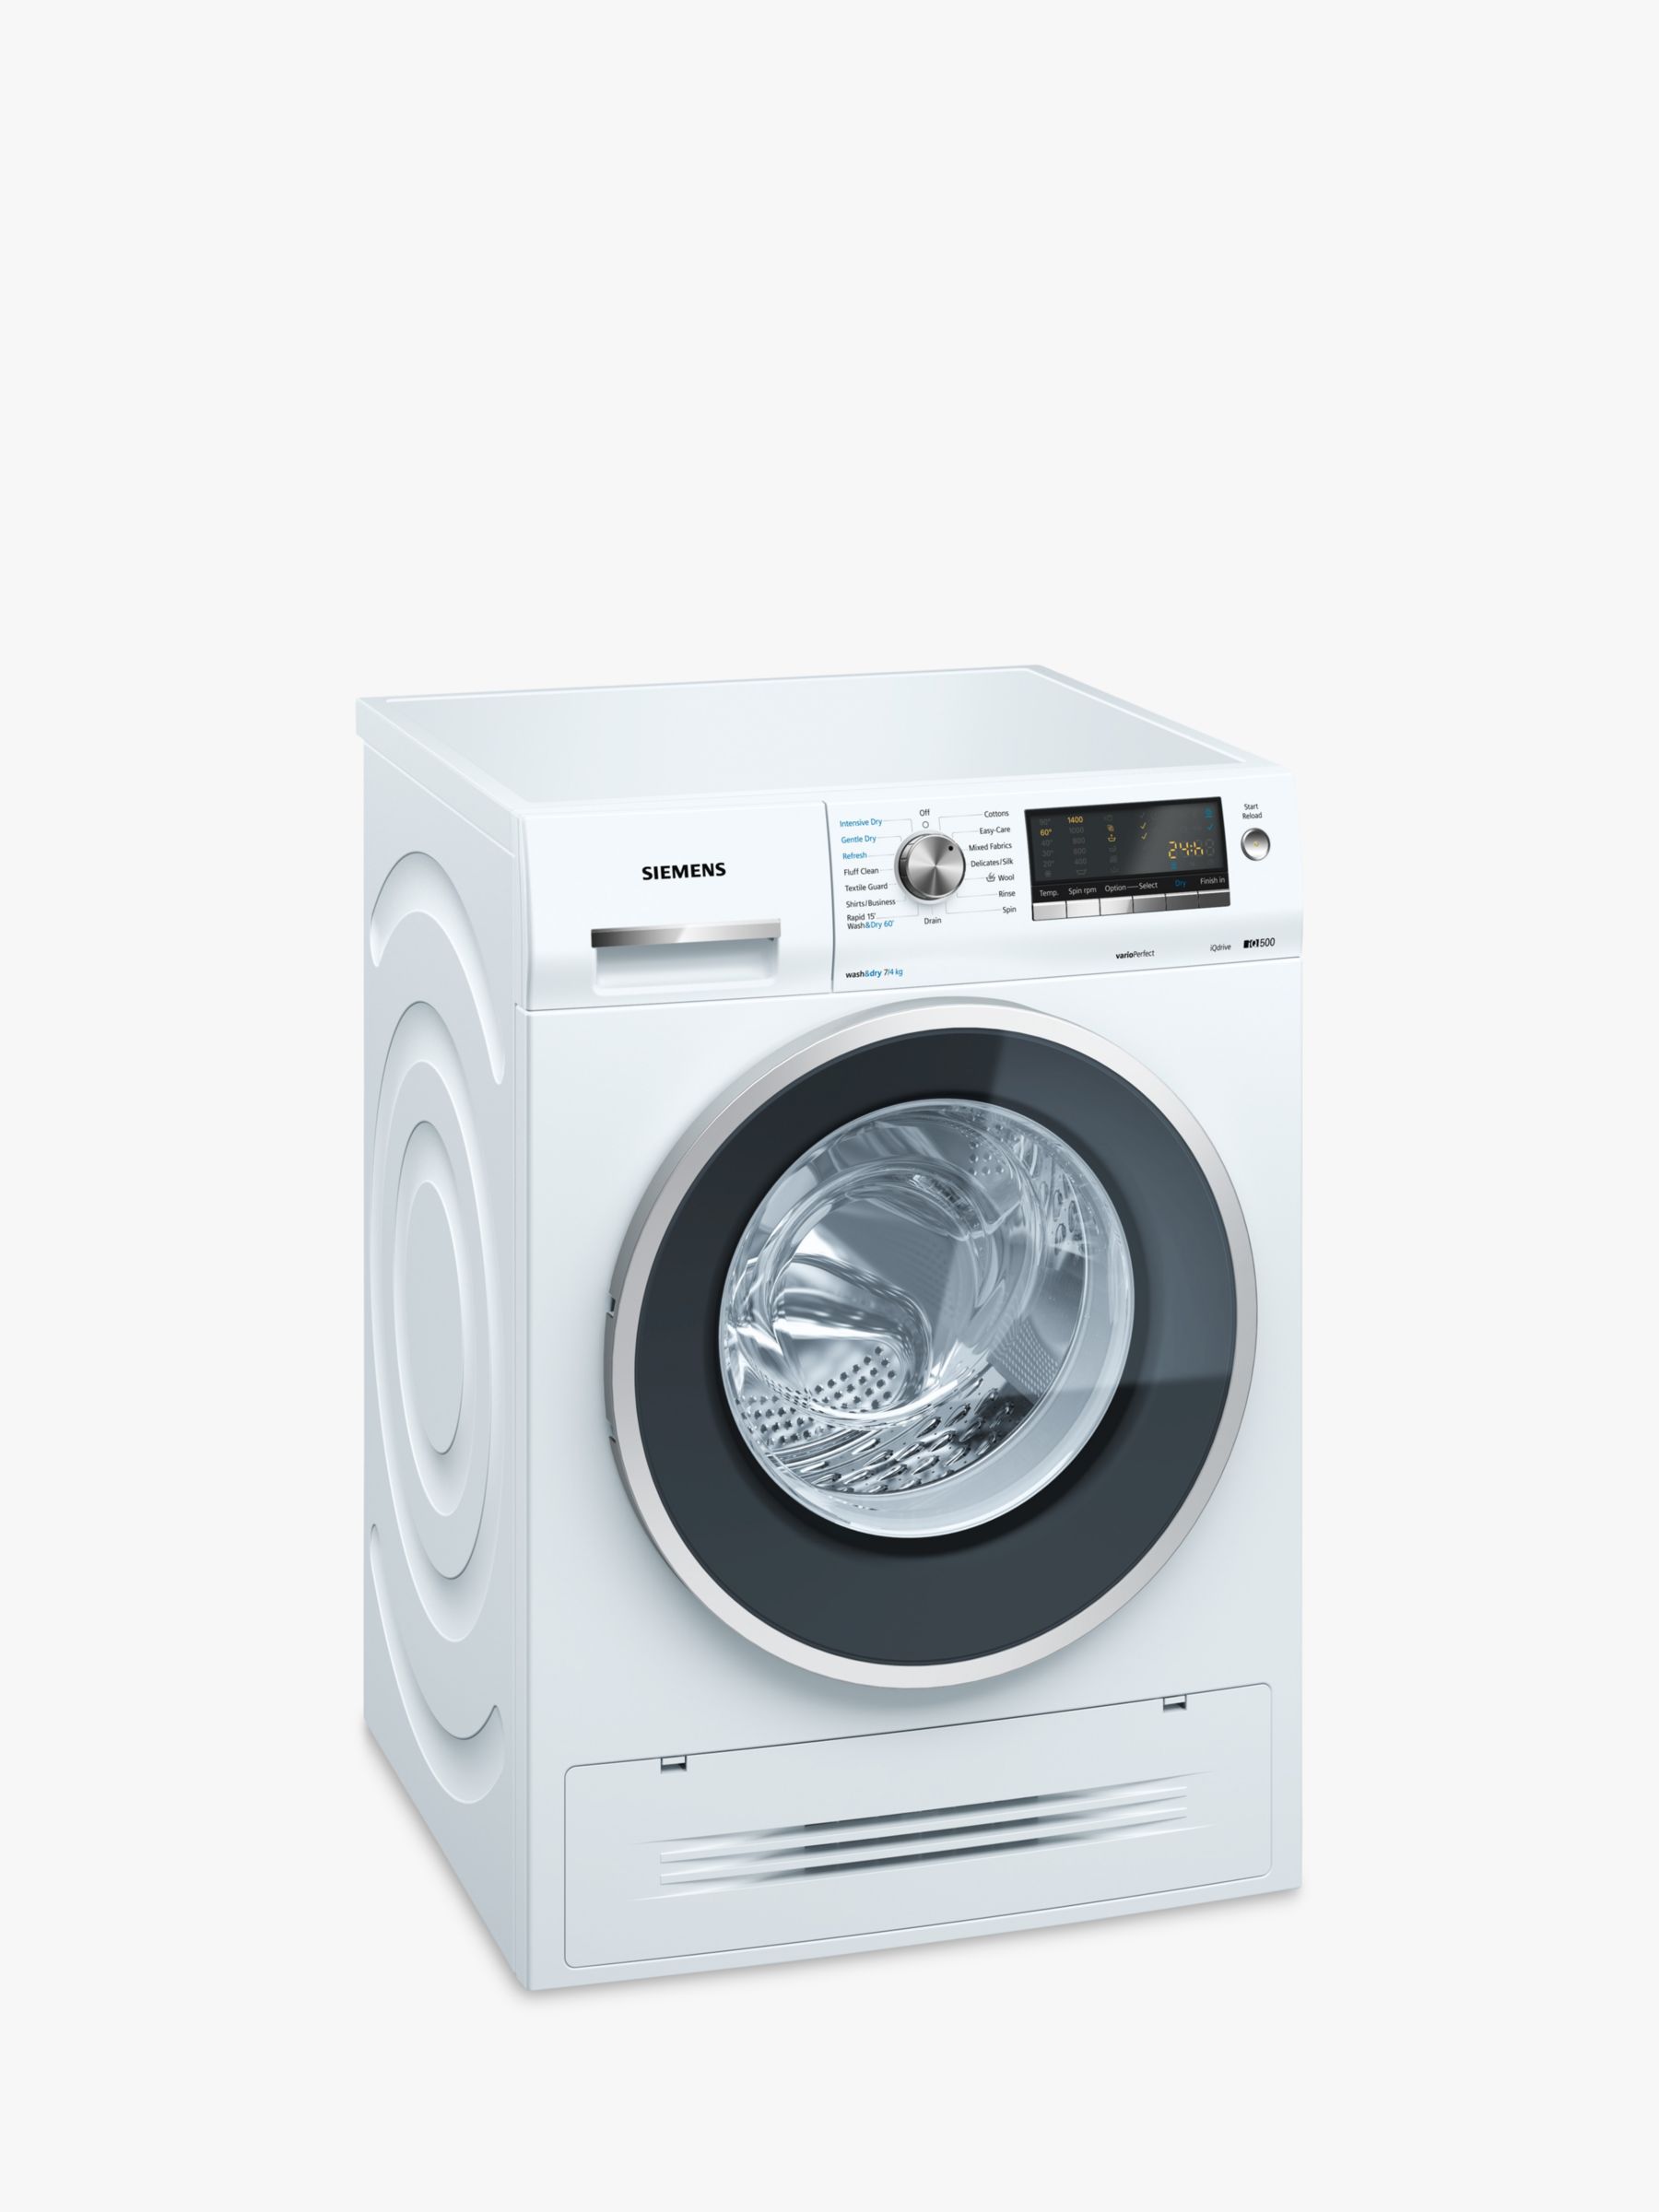 Siemens WD14H422GB Washer Dryer, 7kgWash/4kg Dry Load, A Energy Rating, 1400rpm Spin, White